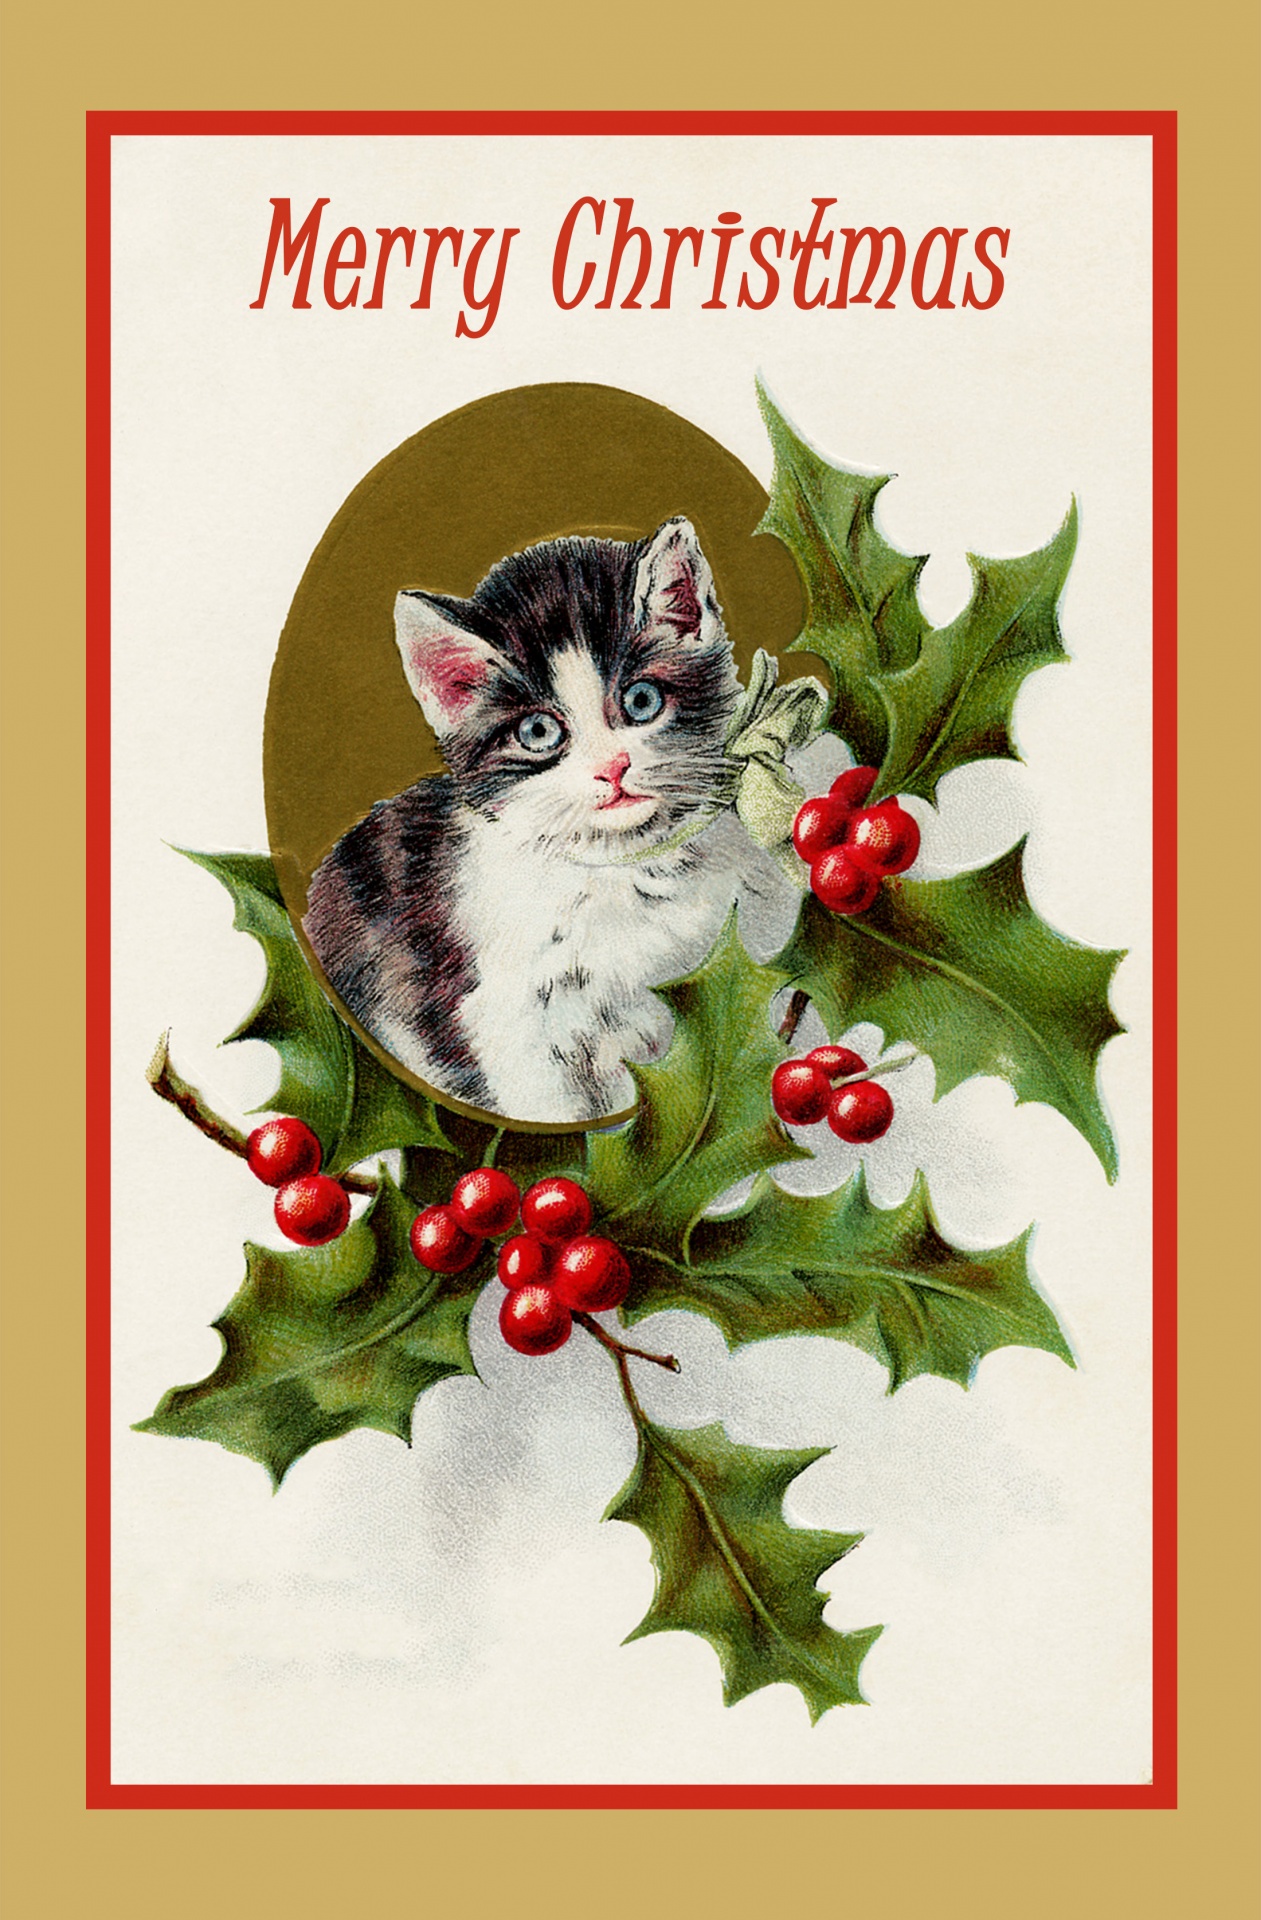 Vintage christmas card with a cute black and white kitten, cat with holly and red berries